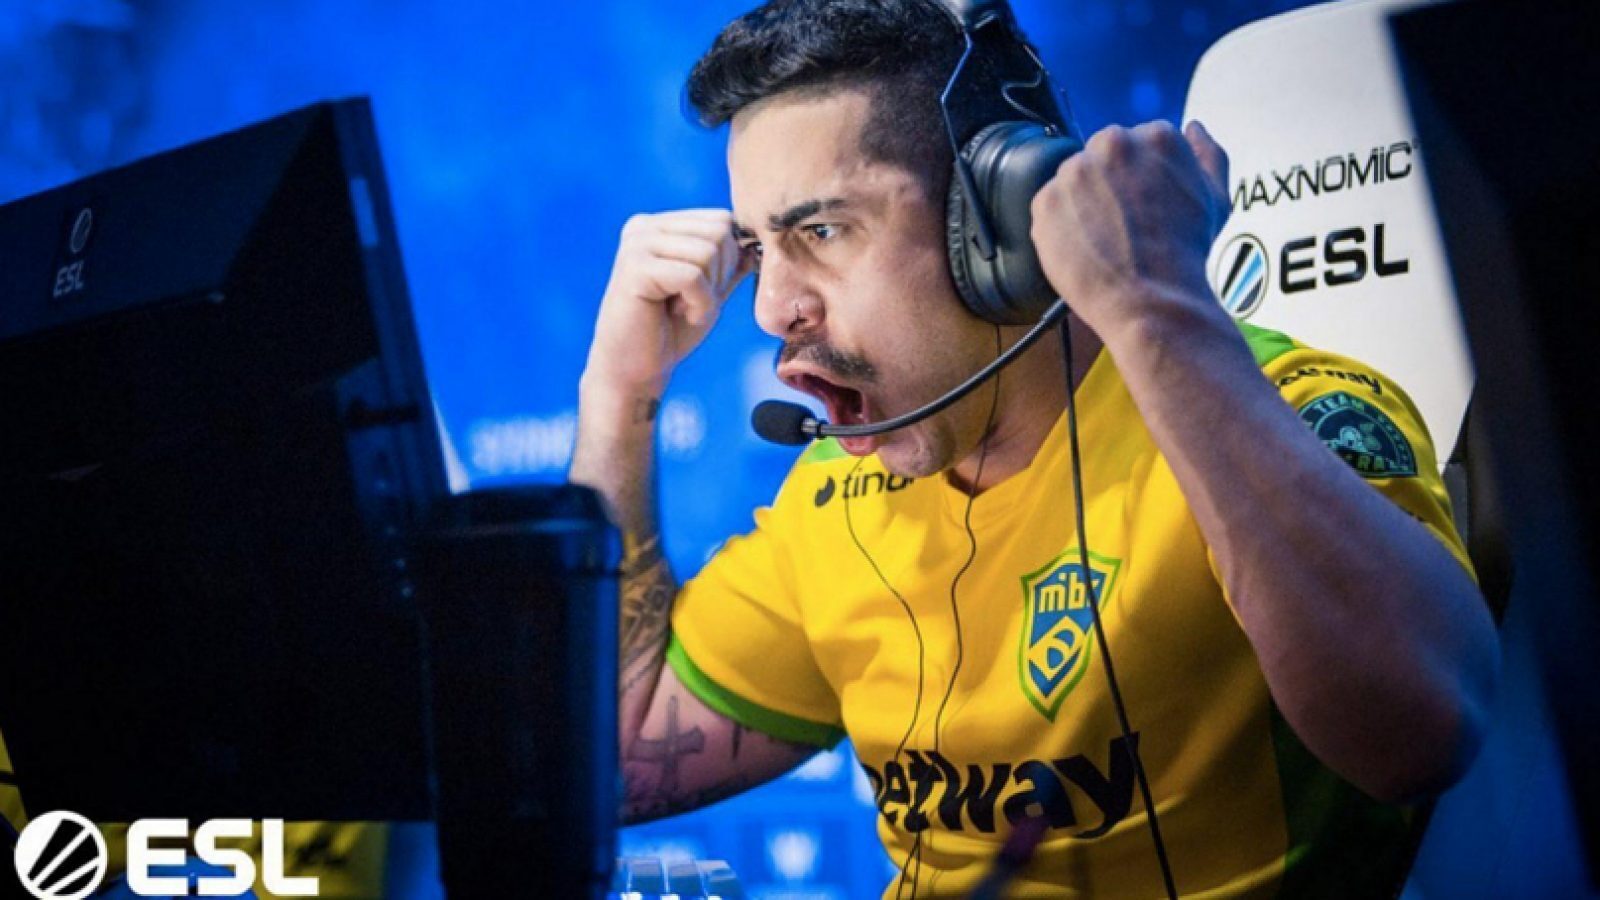 The second set of Quarterfinal matches took place at IEM Katowice with MIBR shining against Renegades and Astralis continuing their dominance. (Photo courtesy of ESL)